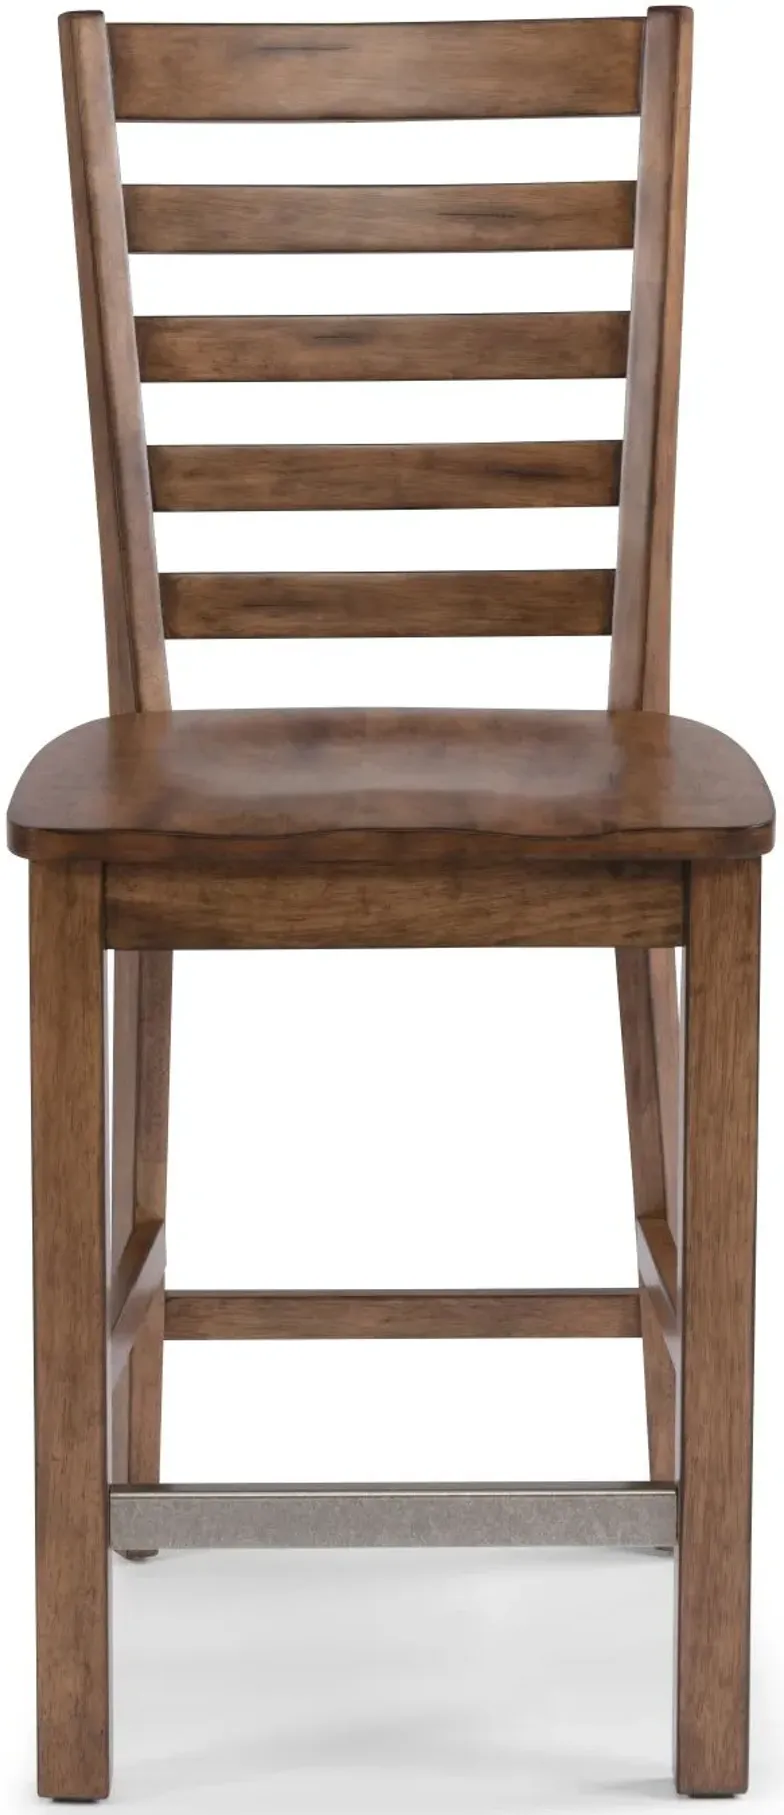 Tuscon Bar Stool by homestyles